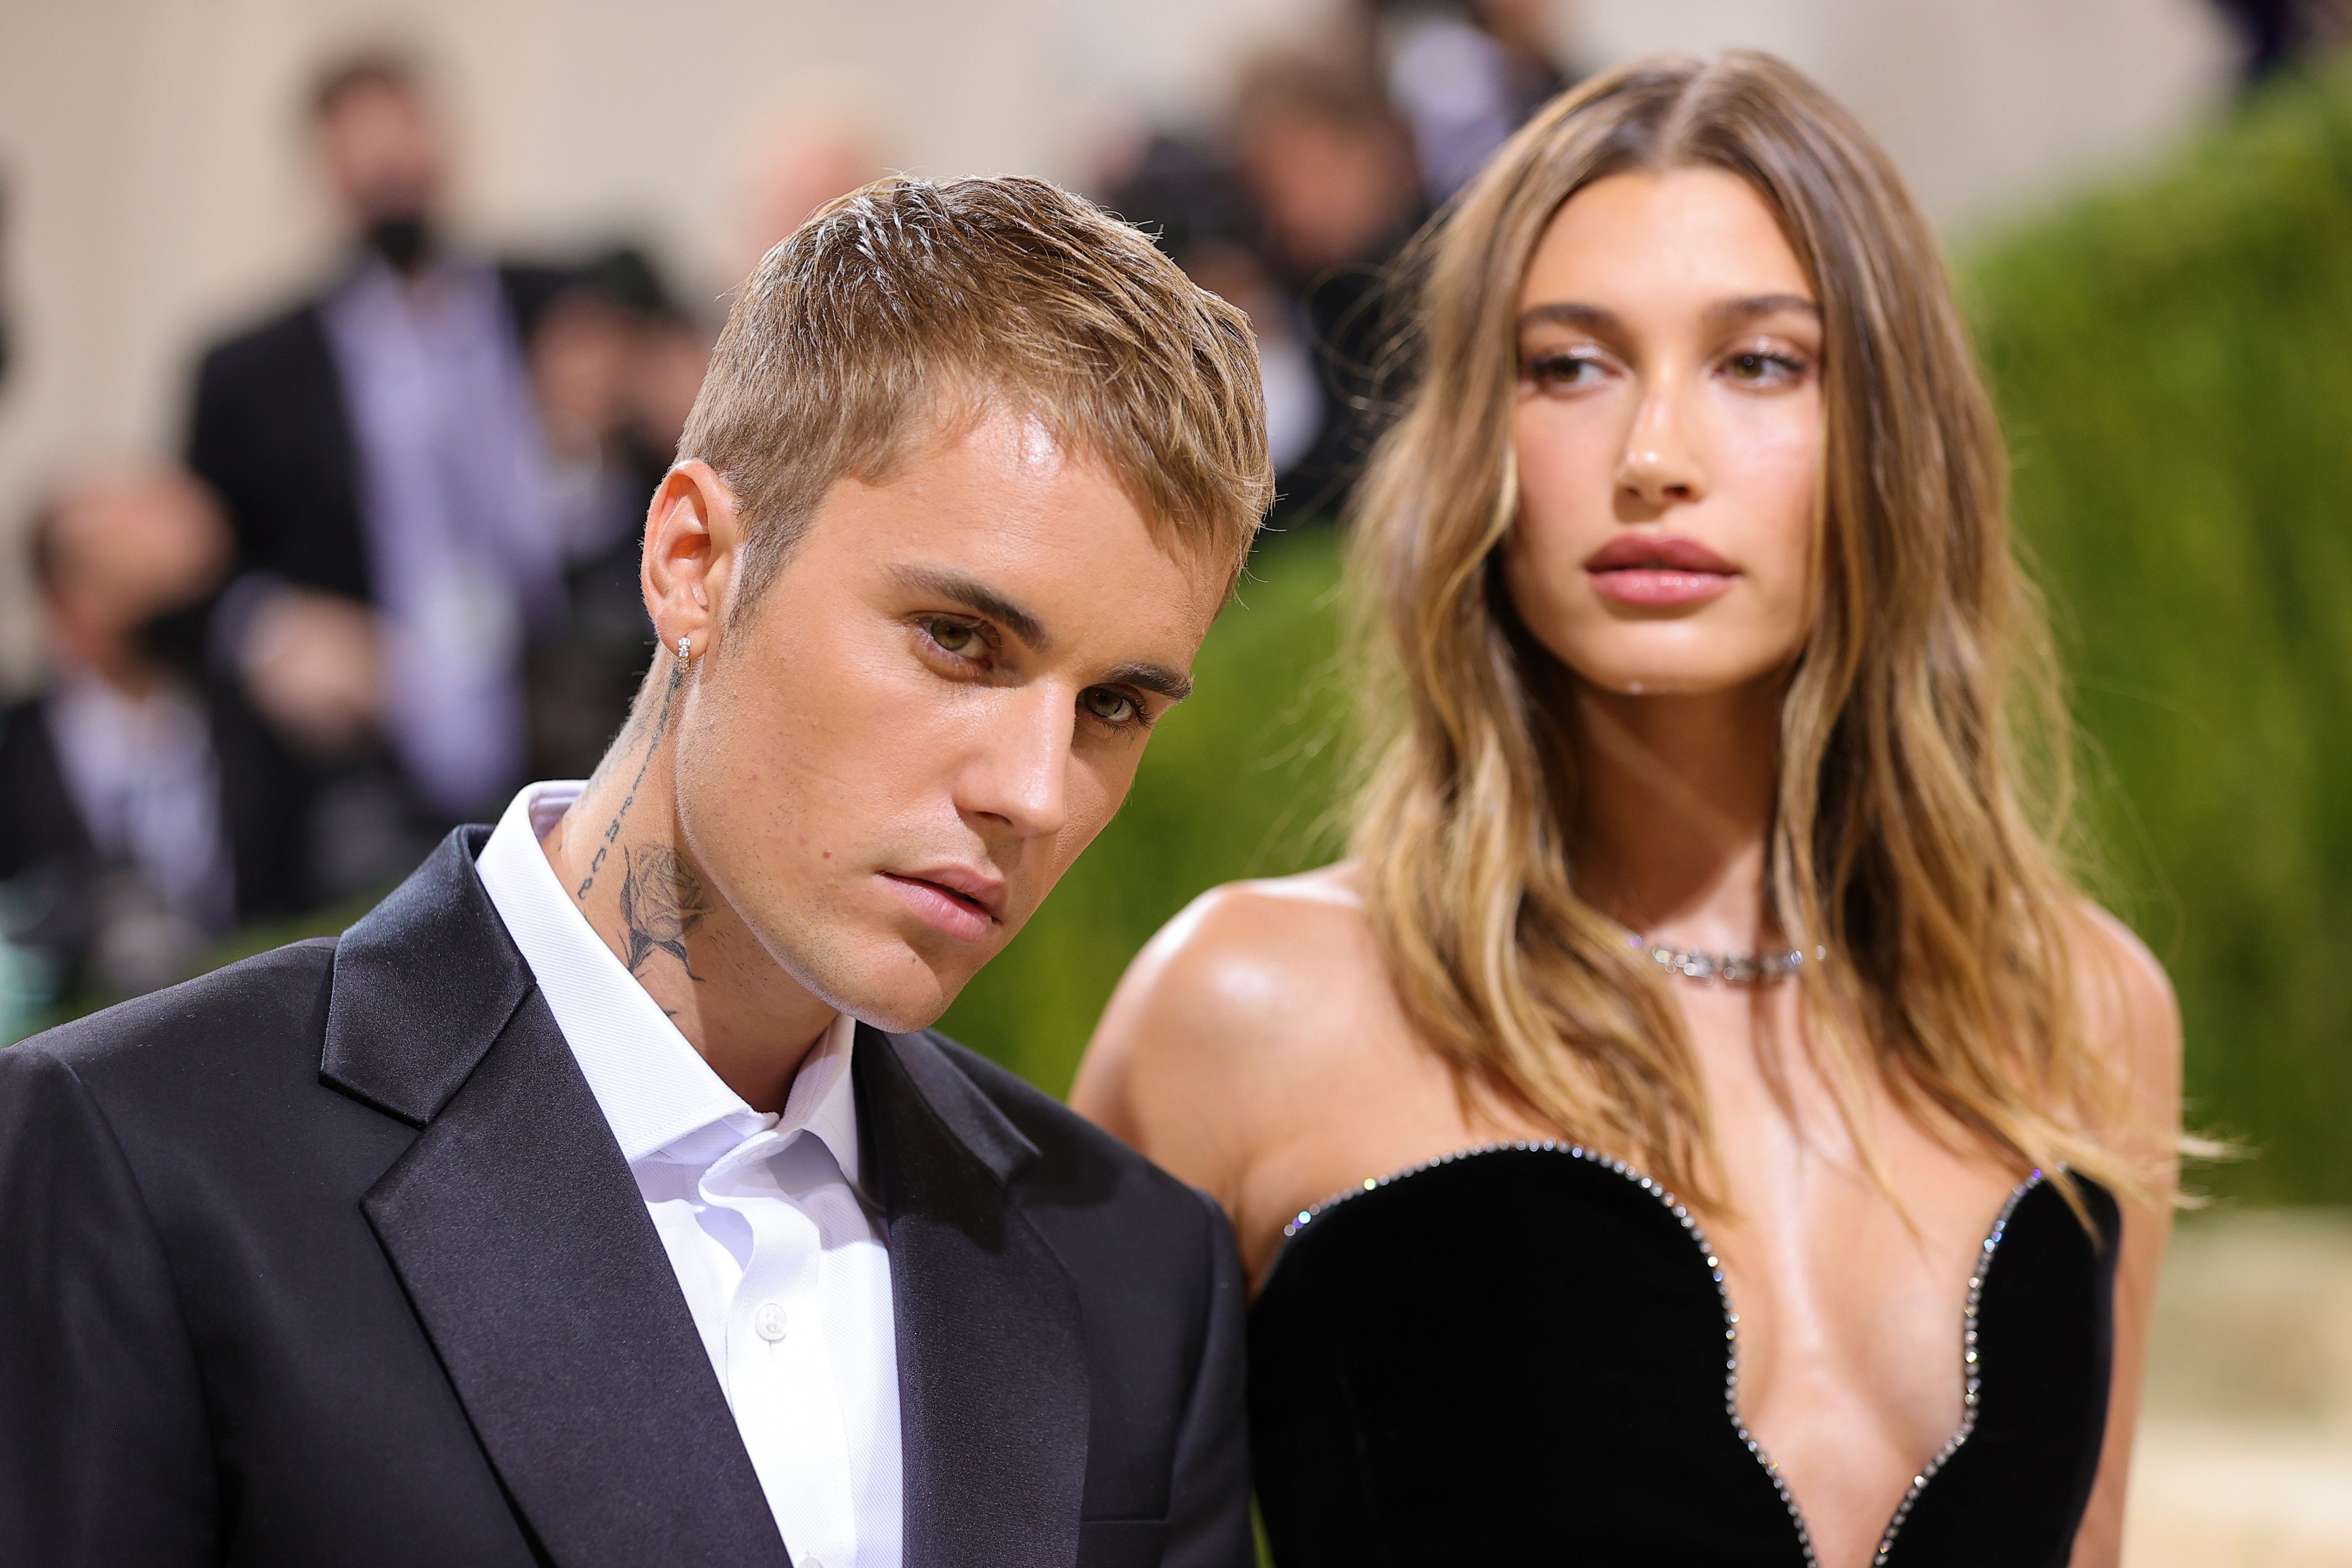 Justin Bieber And Hailey Bieber Attend The 2021 Met Gala News Photo 1682990594 